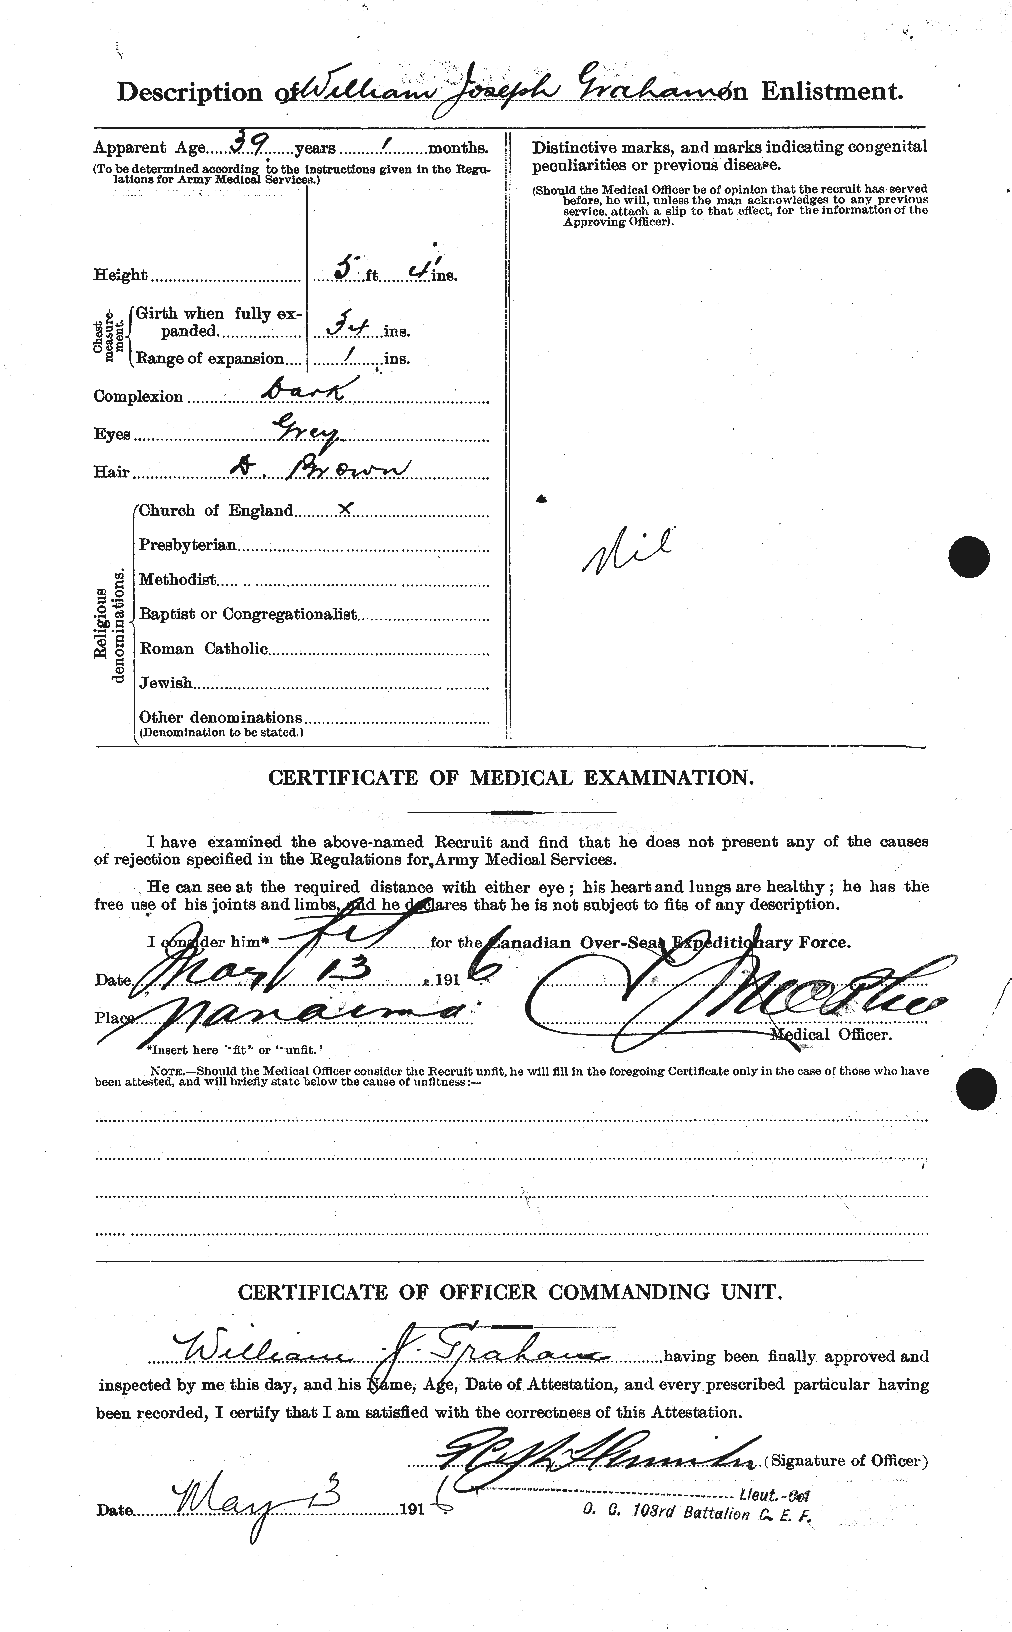 Personnel Records of the First World War - CEF 358016b